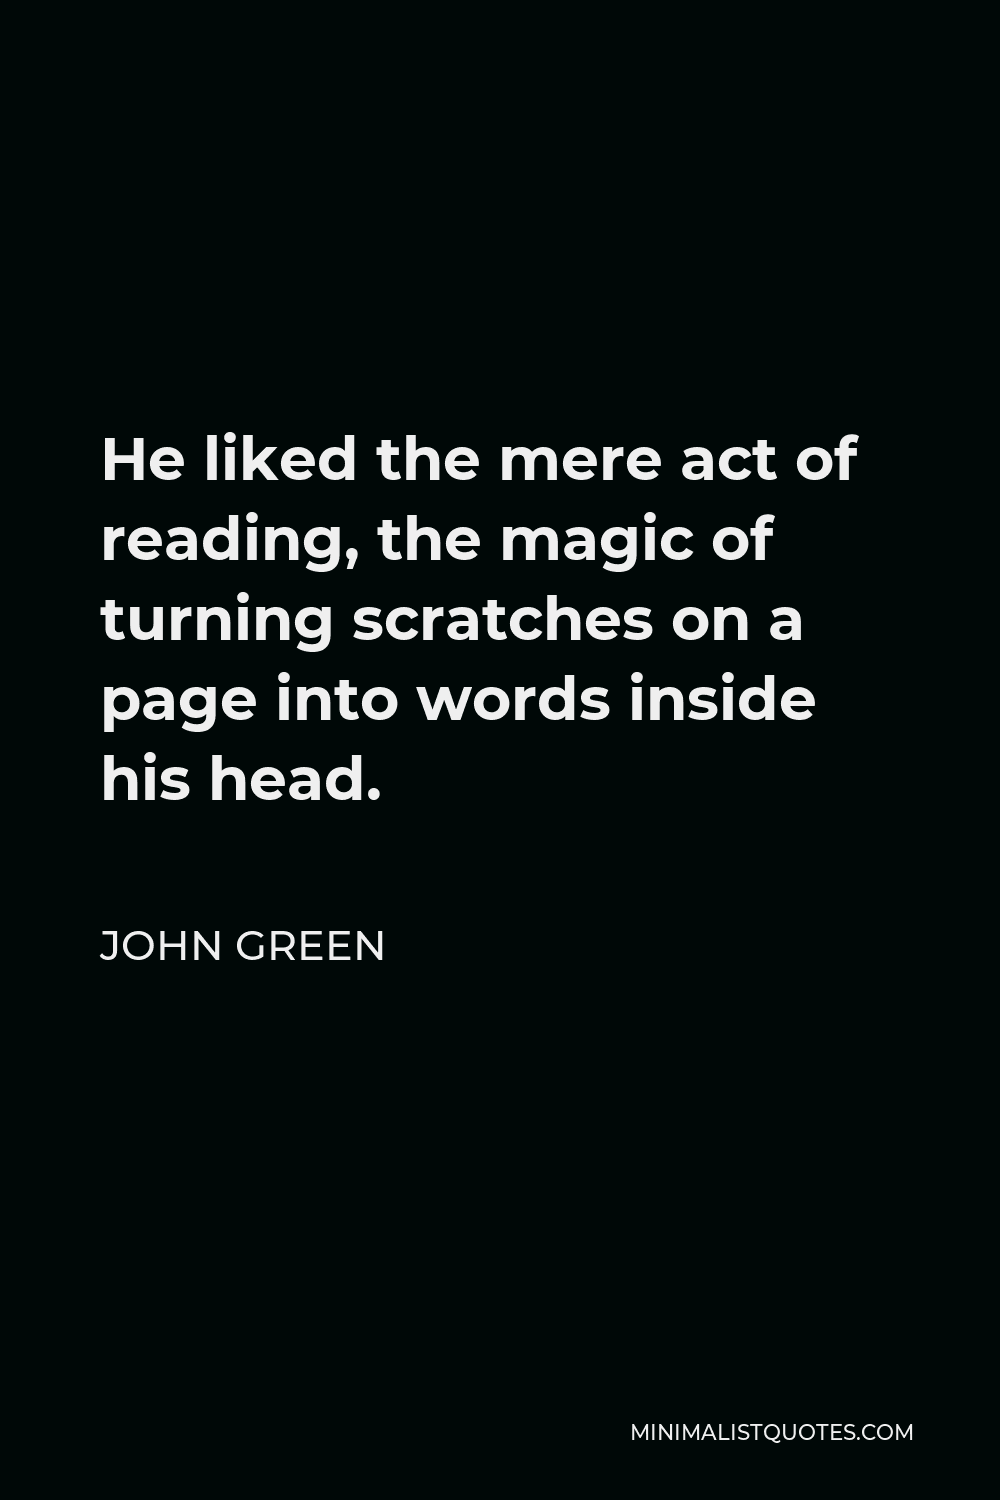 John Green Quote - He liked the mere act of reading, the magic of turning scratches on a page into words inside his head.